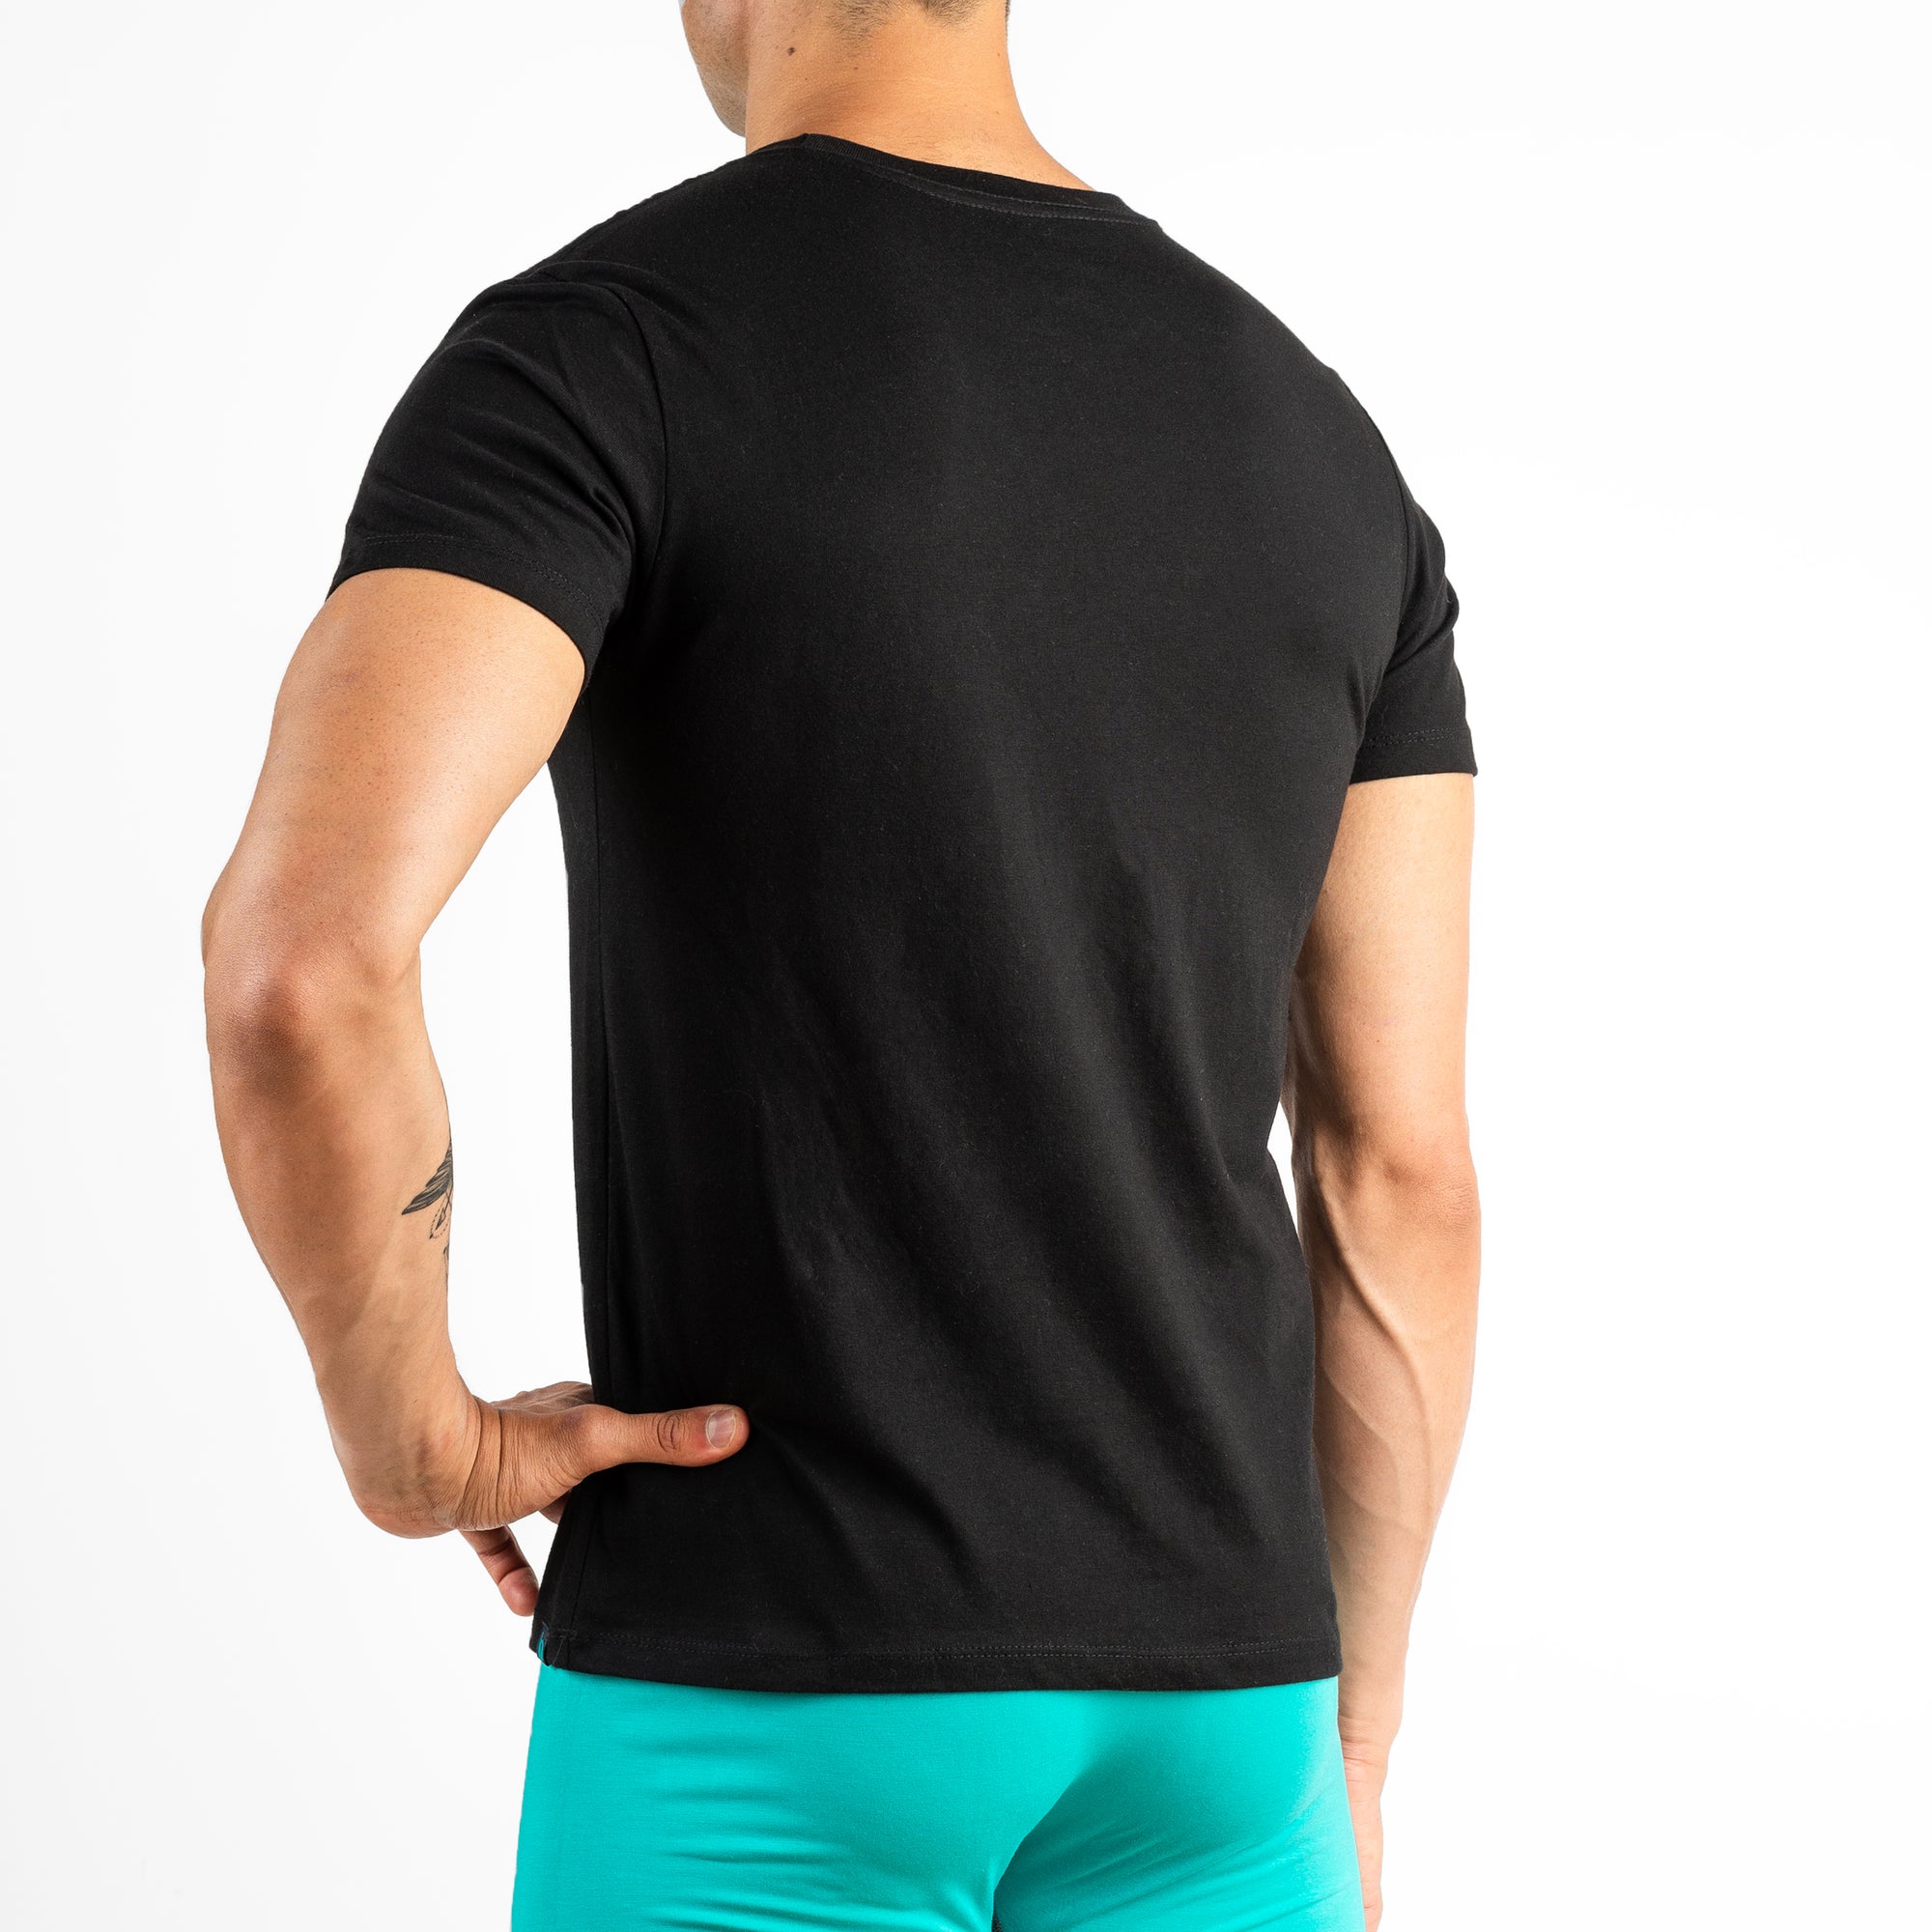 Black Athletic Shirt (Fitted) - Get Basic